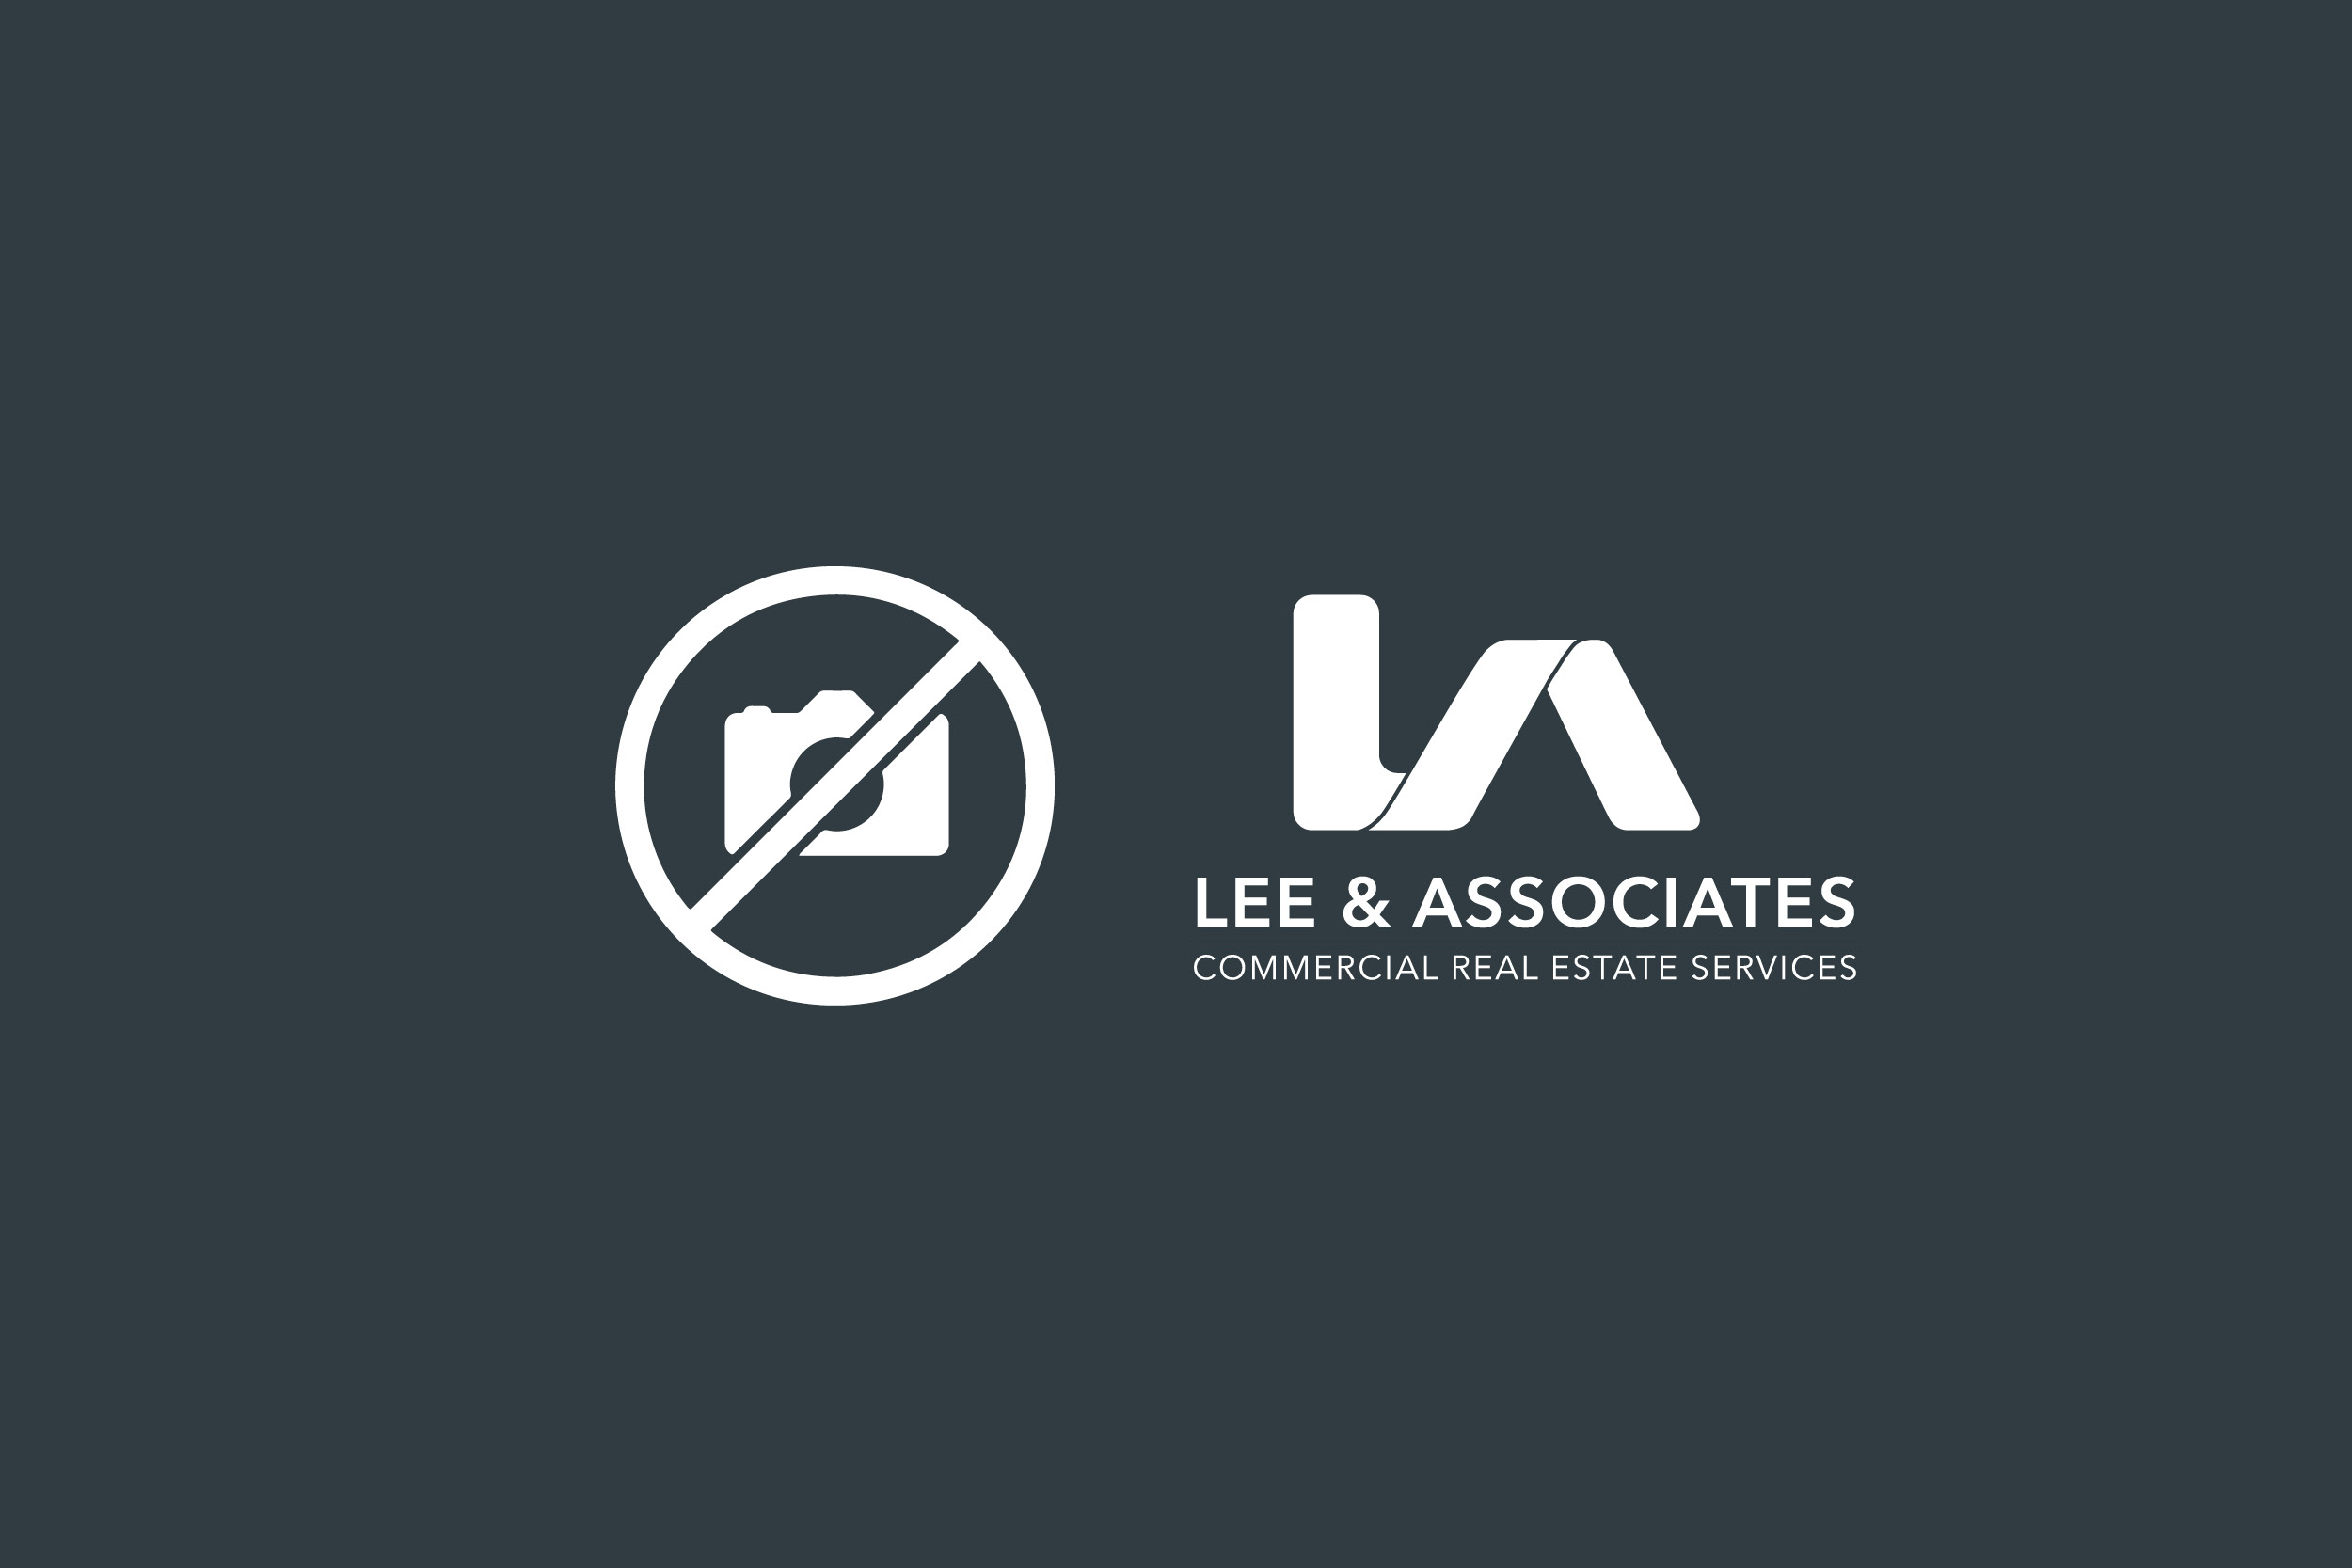 A NEW LEASE FOR FREEZER/COOLER SPACE – NEGOTIATED BY BECKY THOMPSON AT DFW LEE & ASSOCIATES